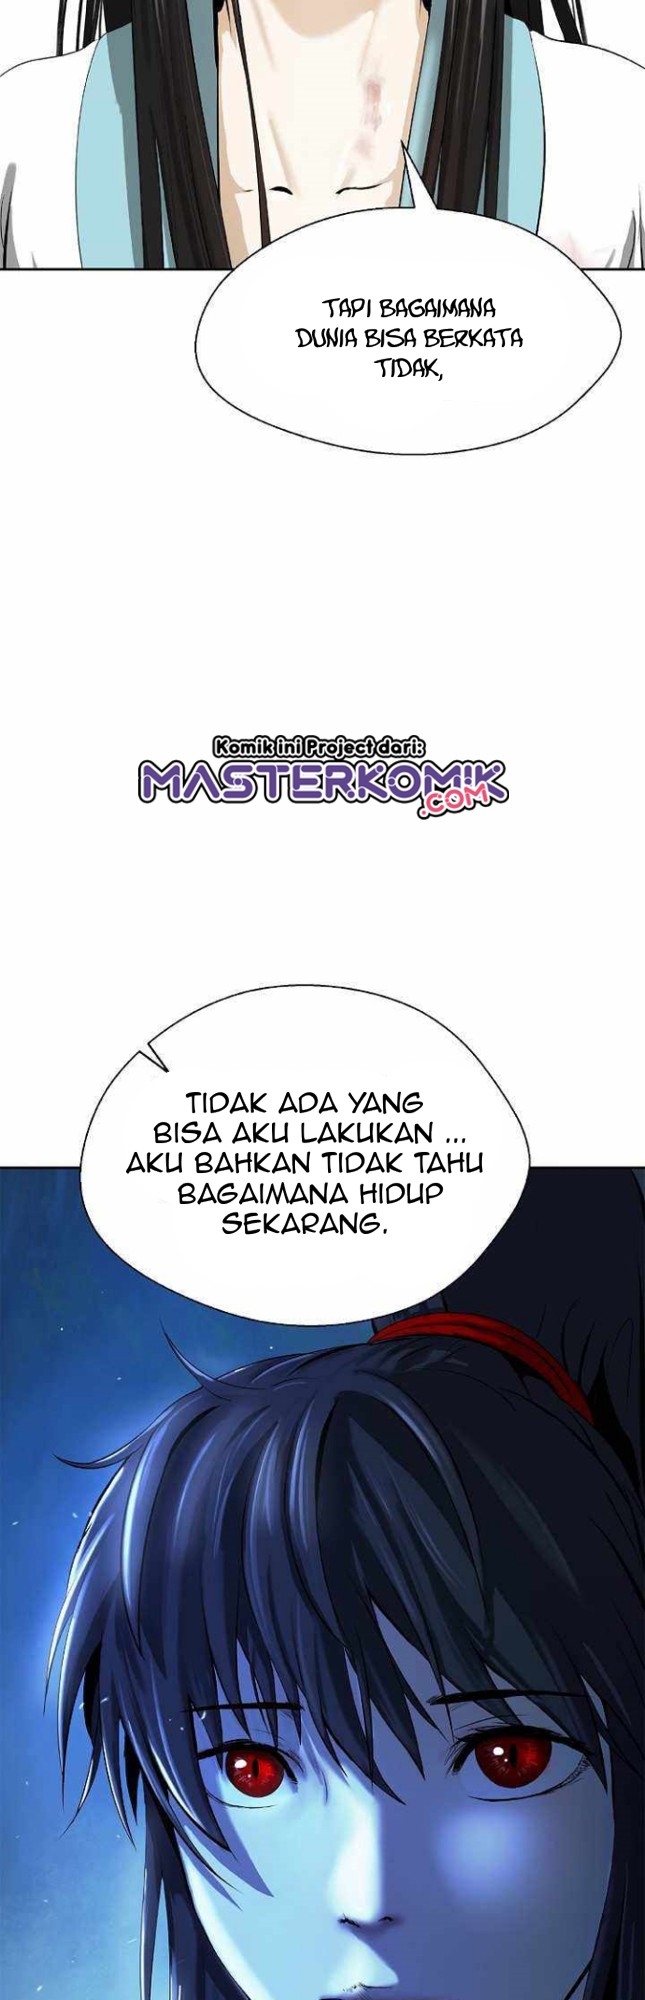 Cystic Story Chapter 21 18